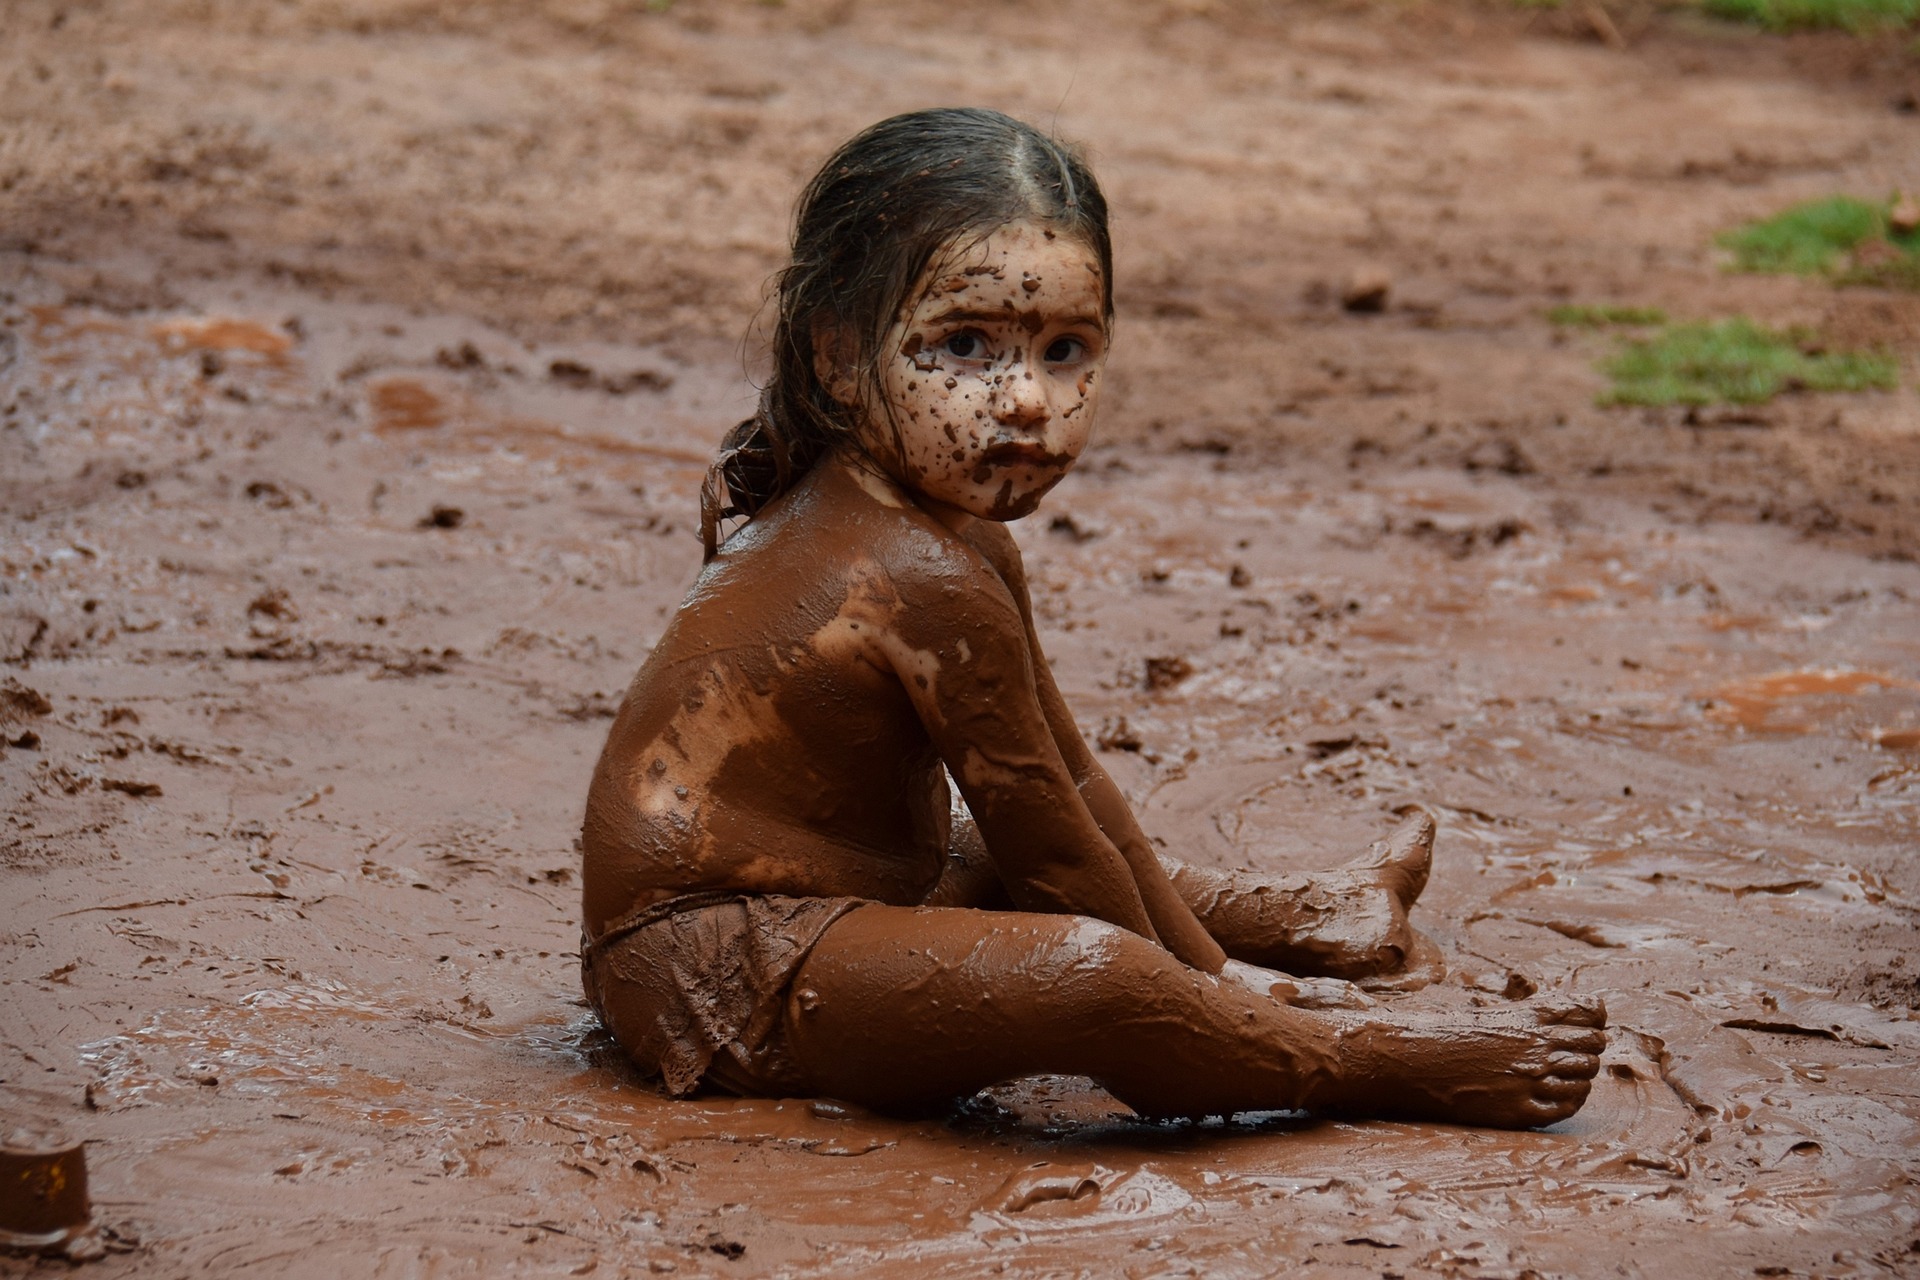 It is a sunny day. A young dark-haired and dark-skinned girl is sitting in the middle of a huge mud puddle. Her whole body is covered in mud! She looks like she has been enjoying herself.